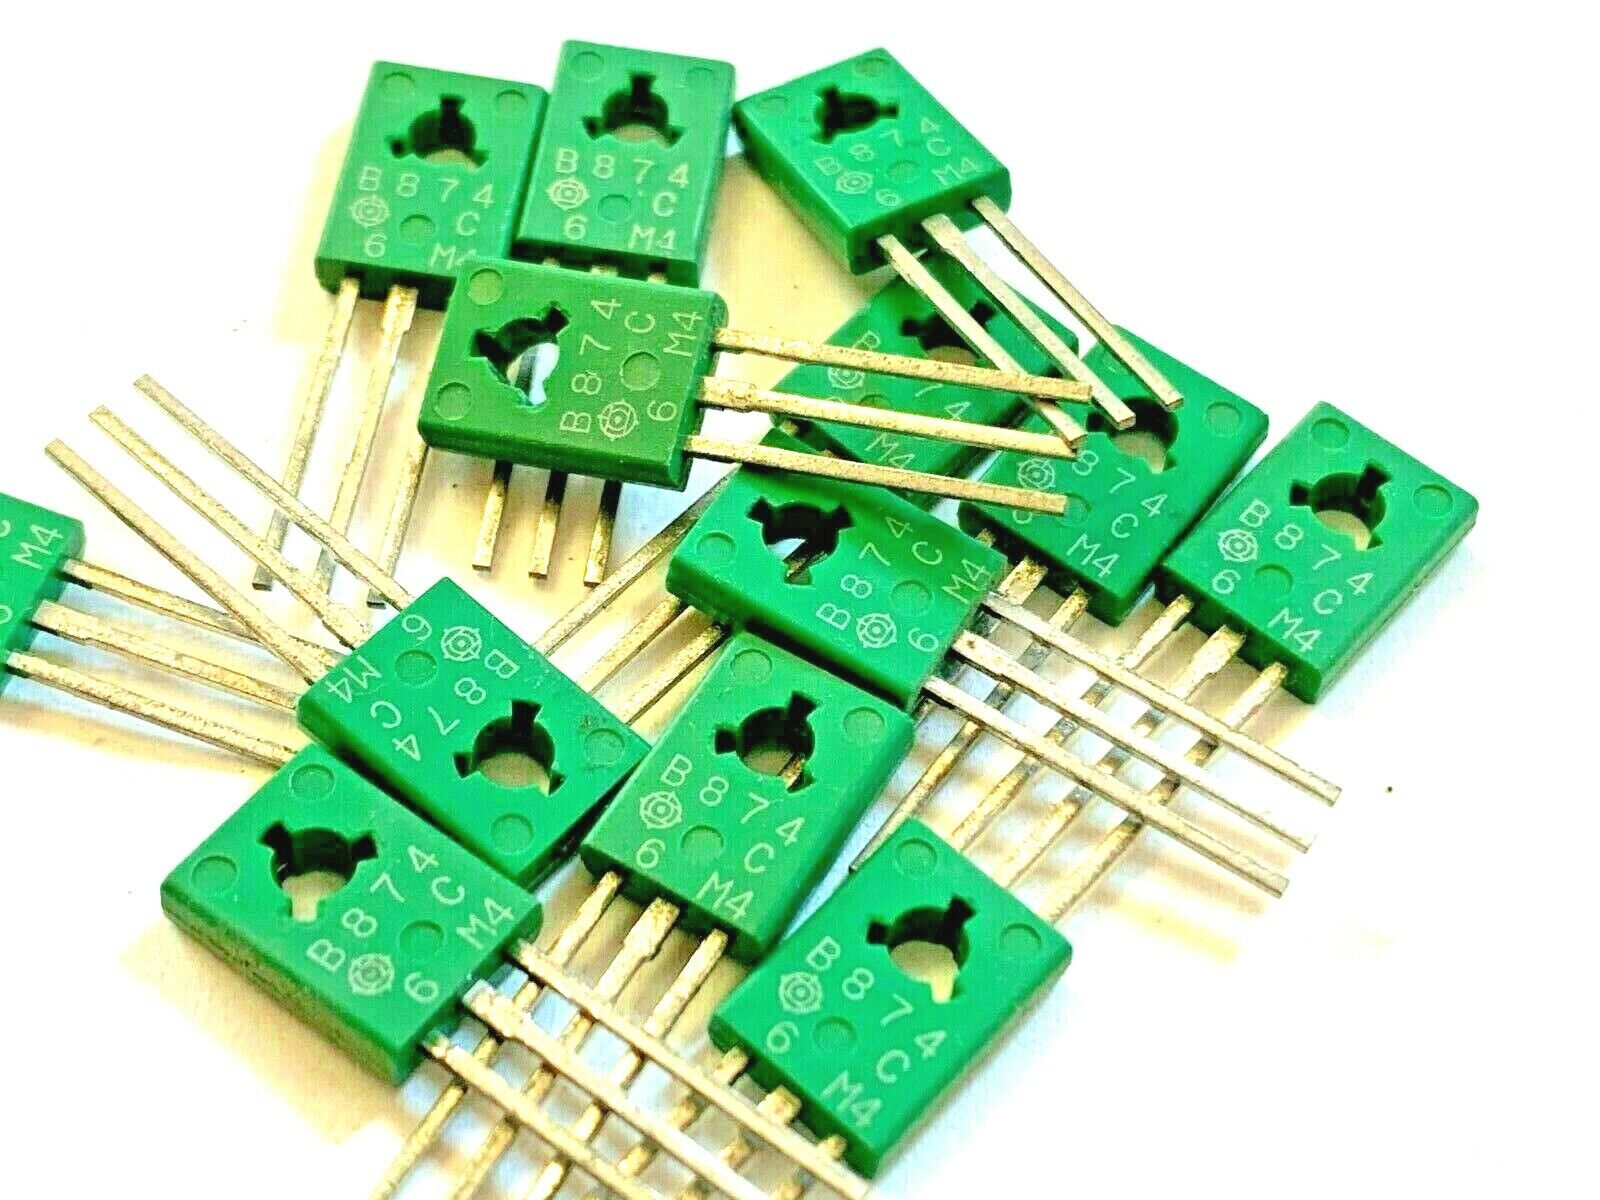 5 Pieces |  2SB874 Transistor Silicon   within the US